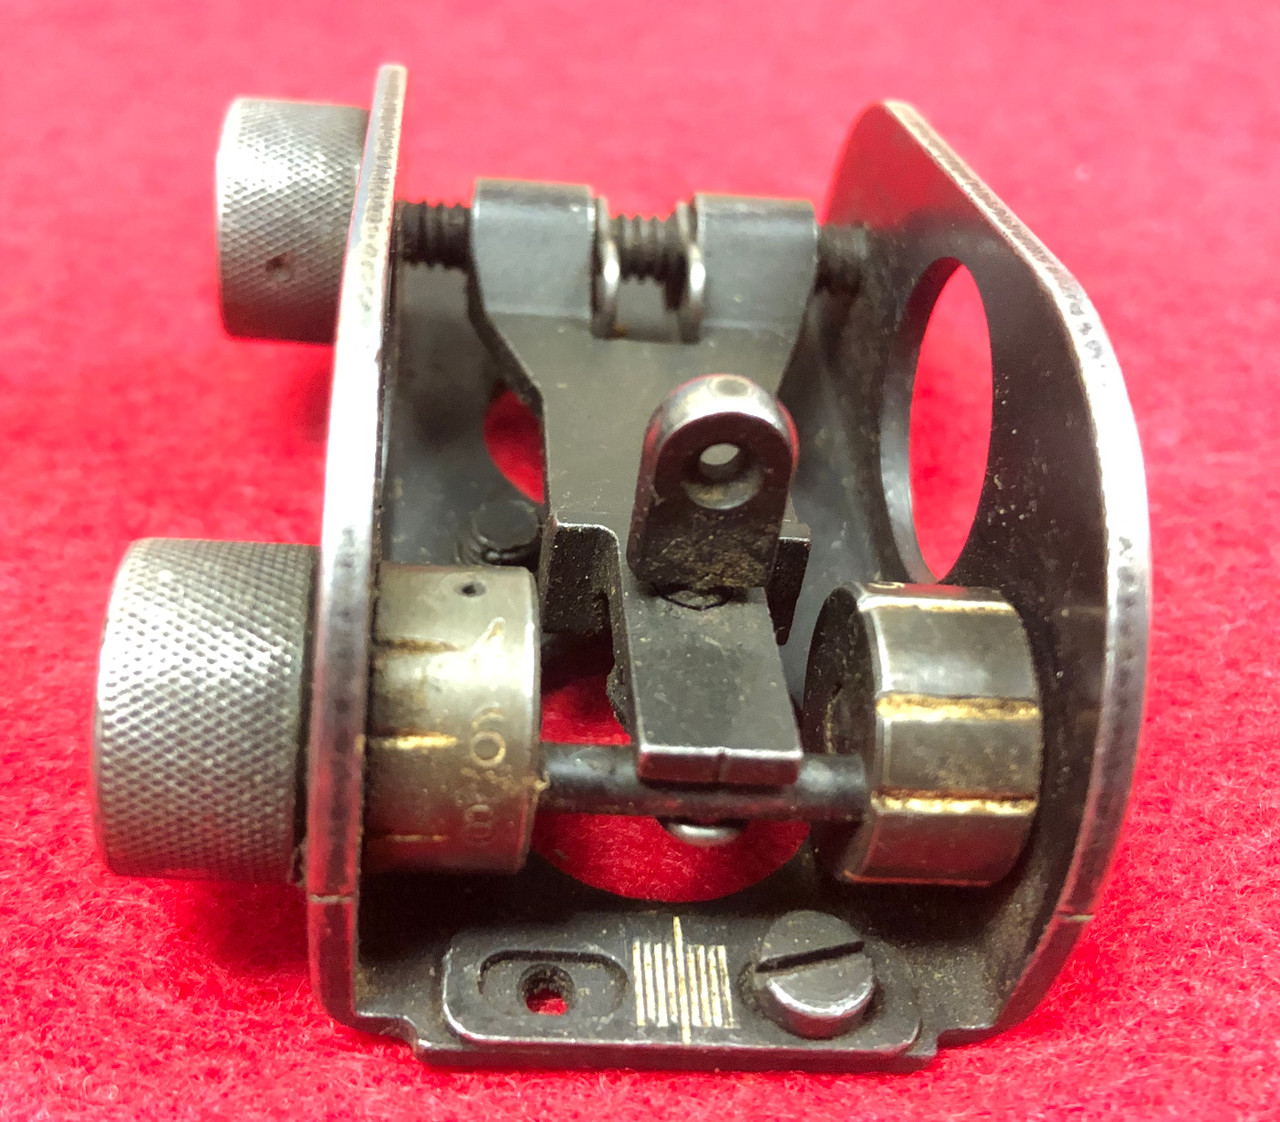 Original Canadian C9 - SAW - M249 MG Complete Rear Sight with Screws